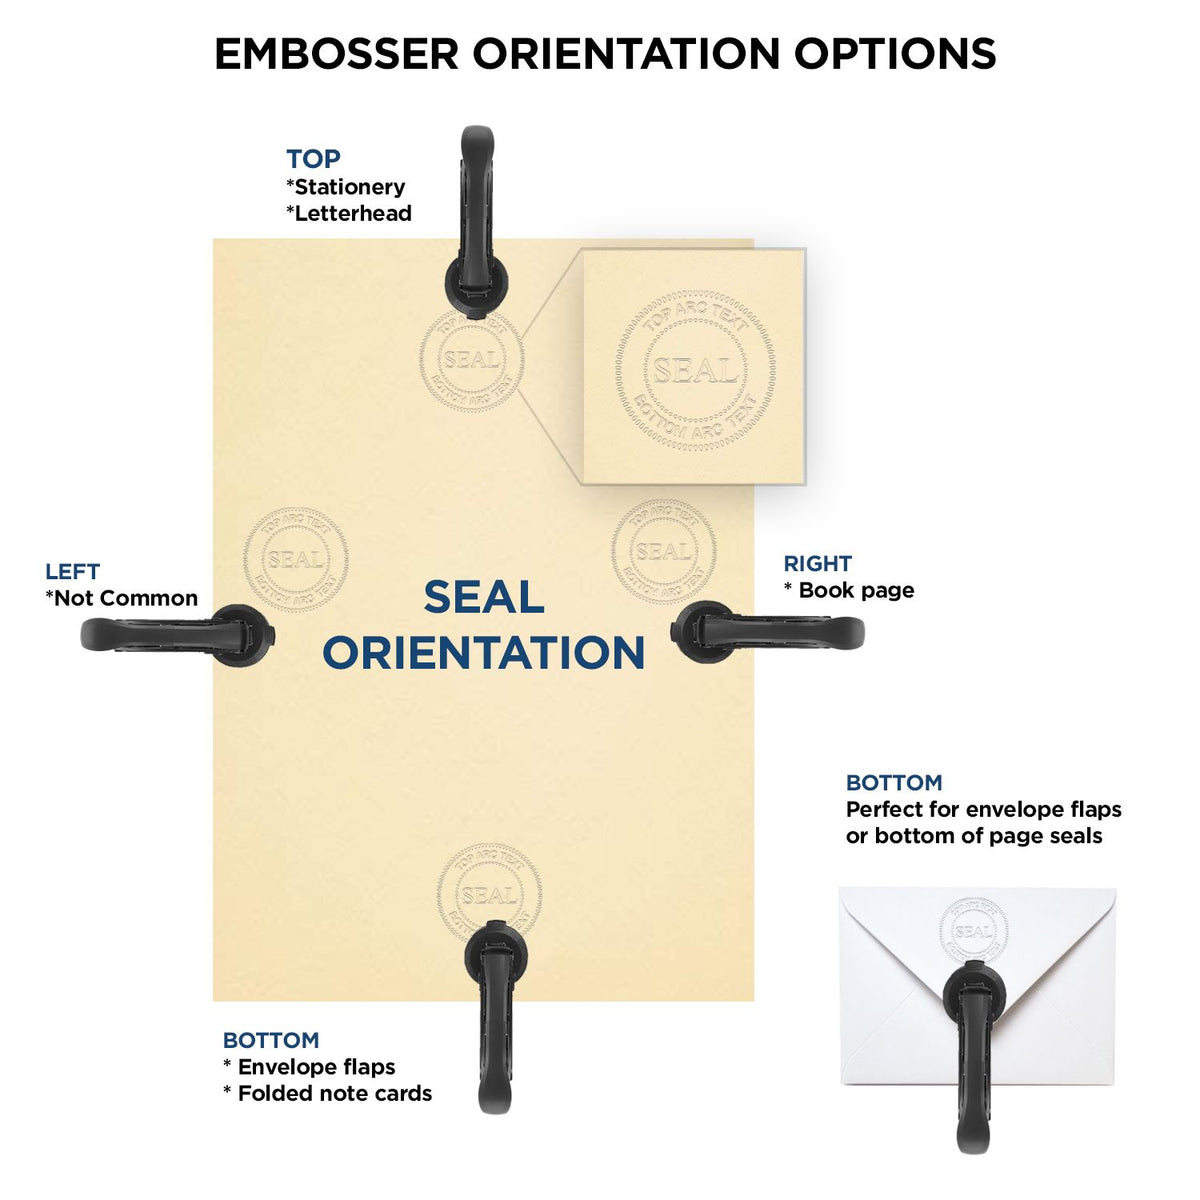 An infographic for the State of Pennsylvania Architectural Seal Embosser showing embosser orientation, this is showing examples of a top, bottom, right and left insert.